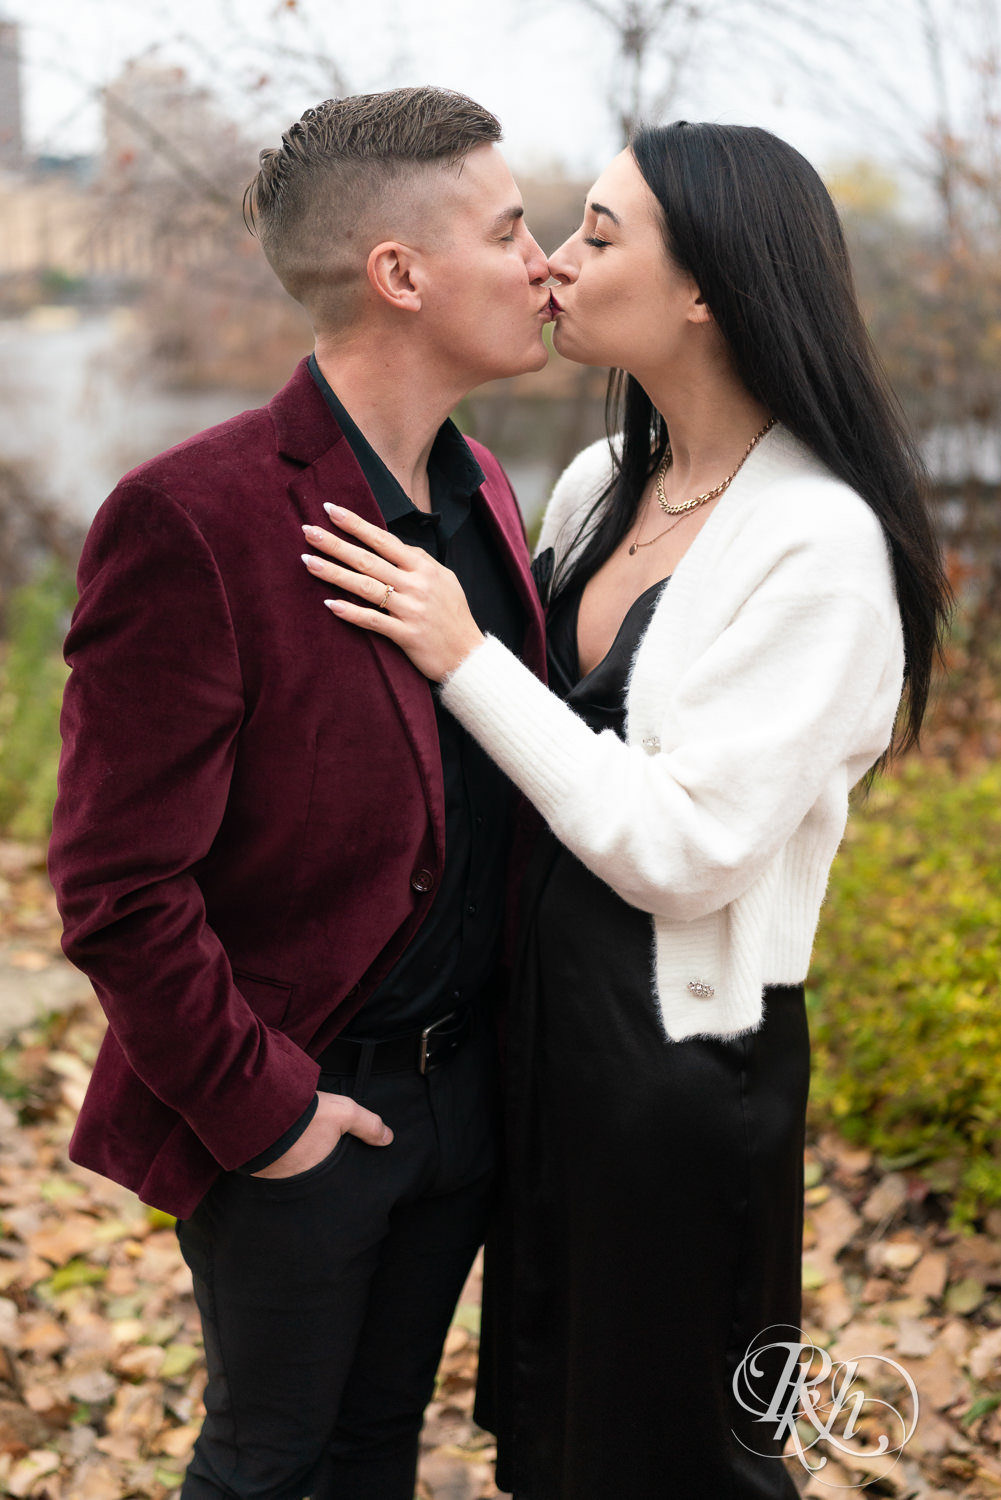 Man in black clothes and burgundy jacket and woman in black dress kiss in the Lower Trail in Minneapolis, Minnesota.